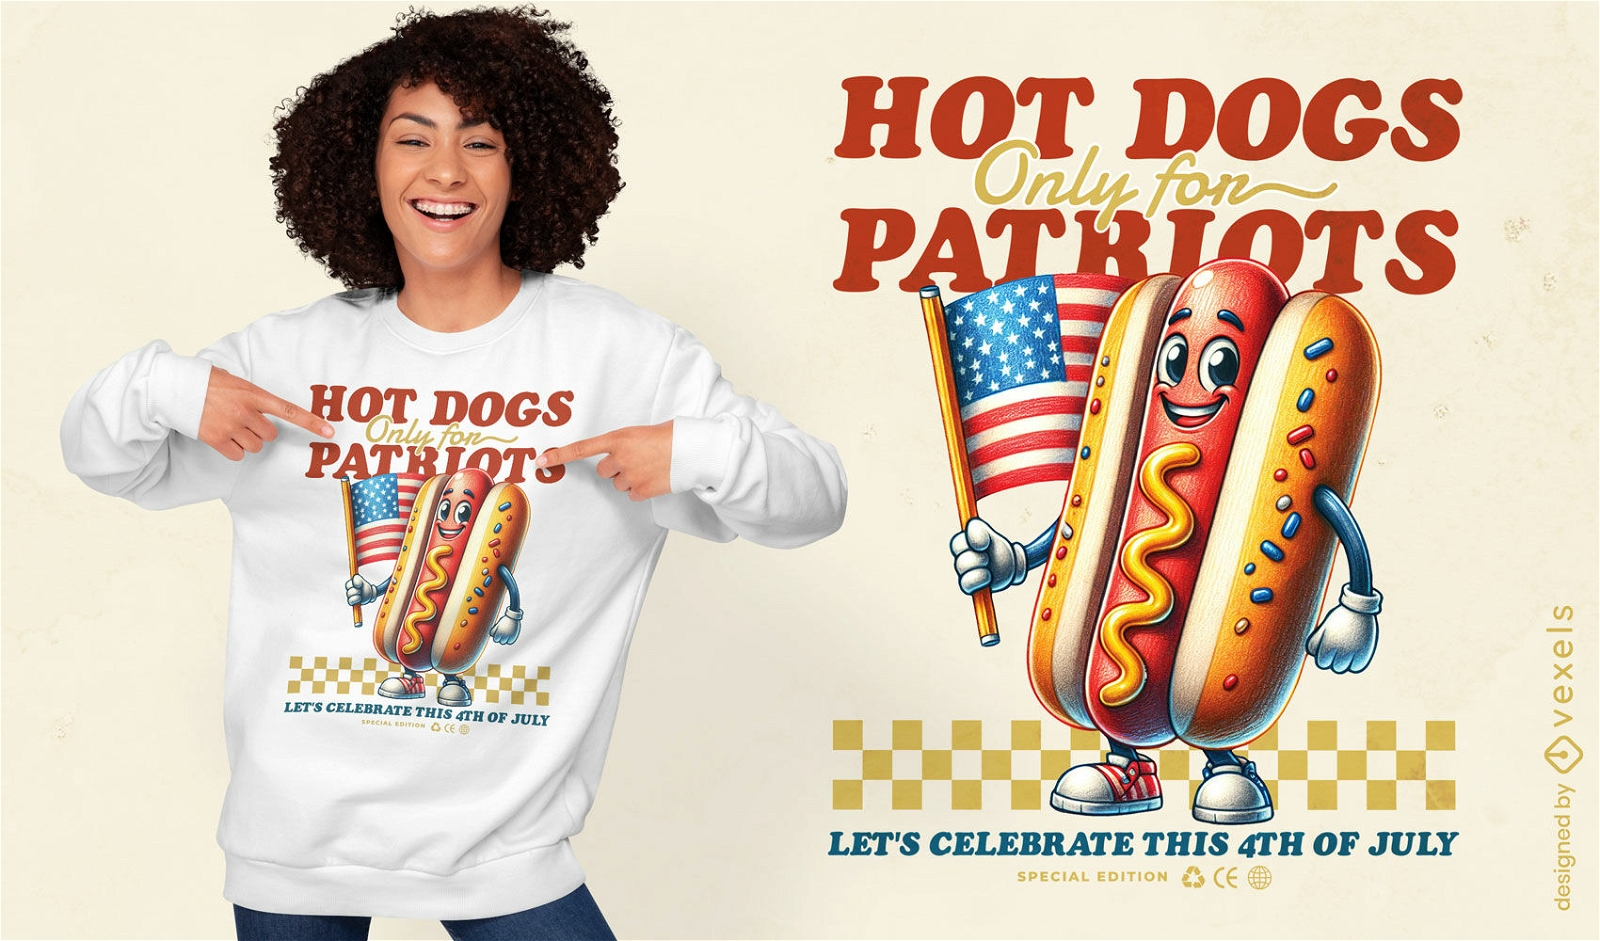 Hot dogs only for patriots t-shirt design